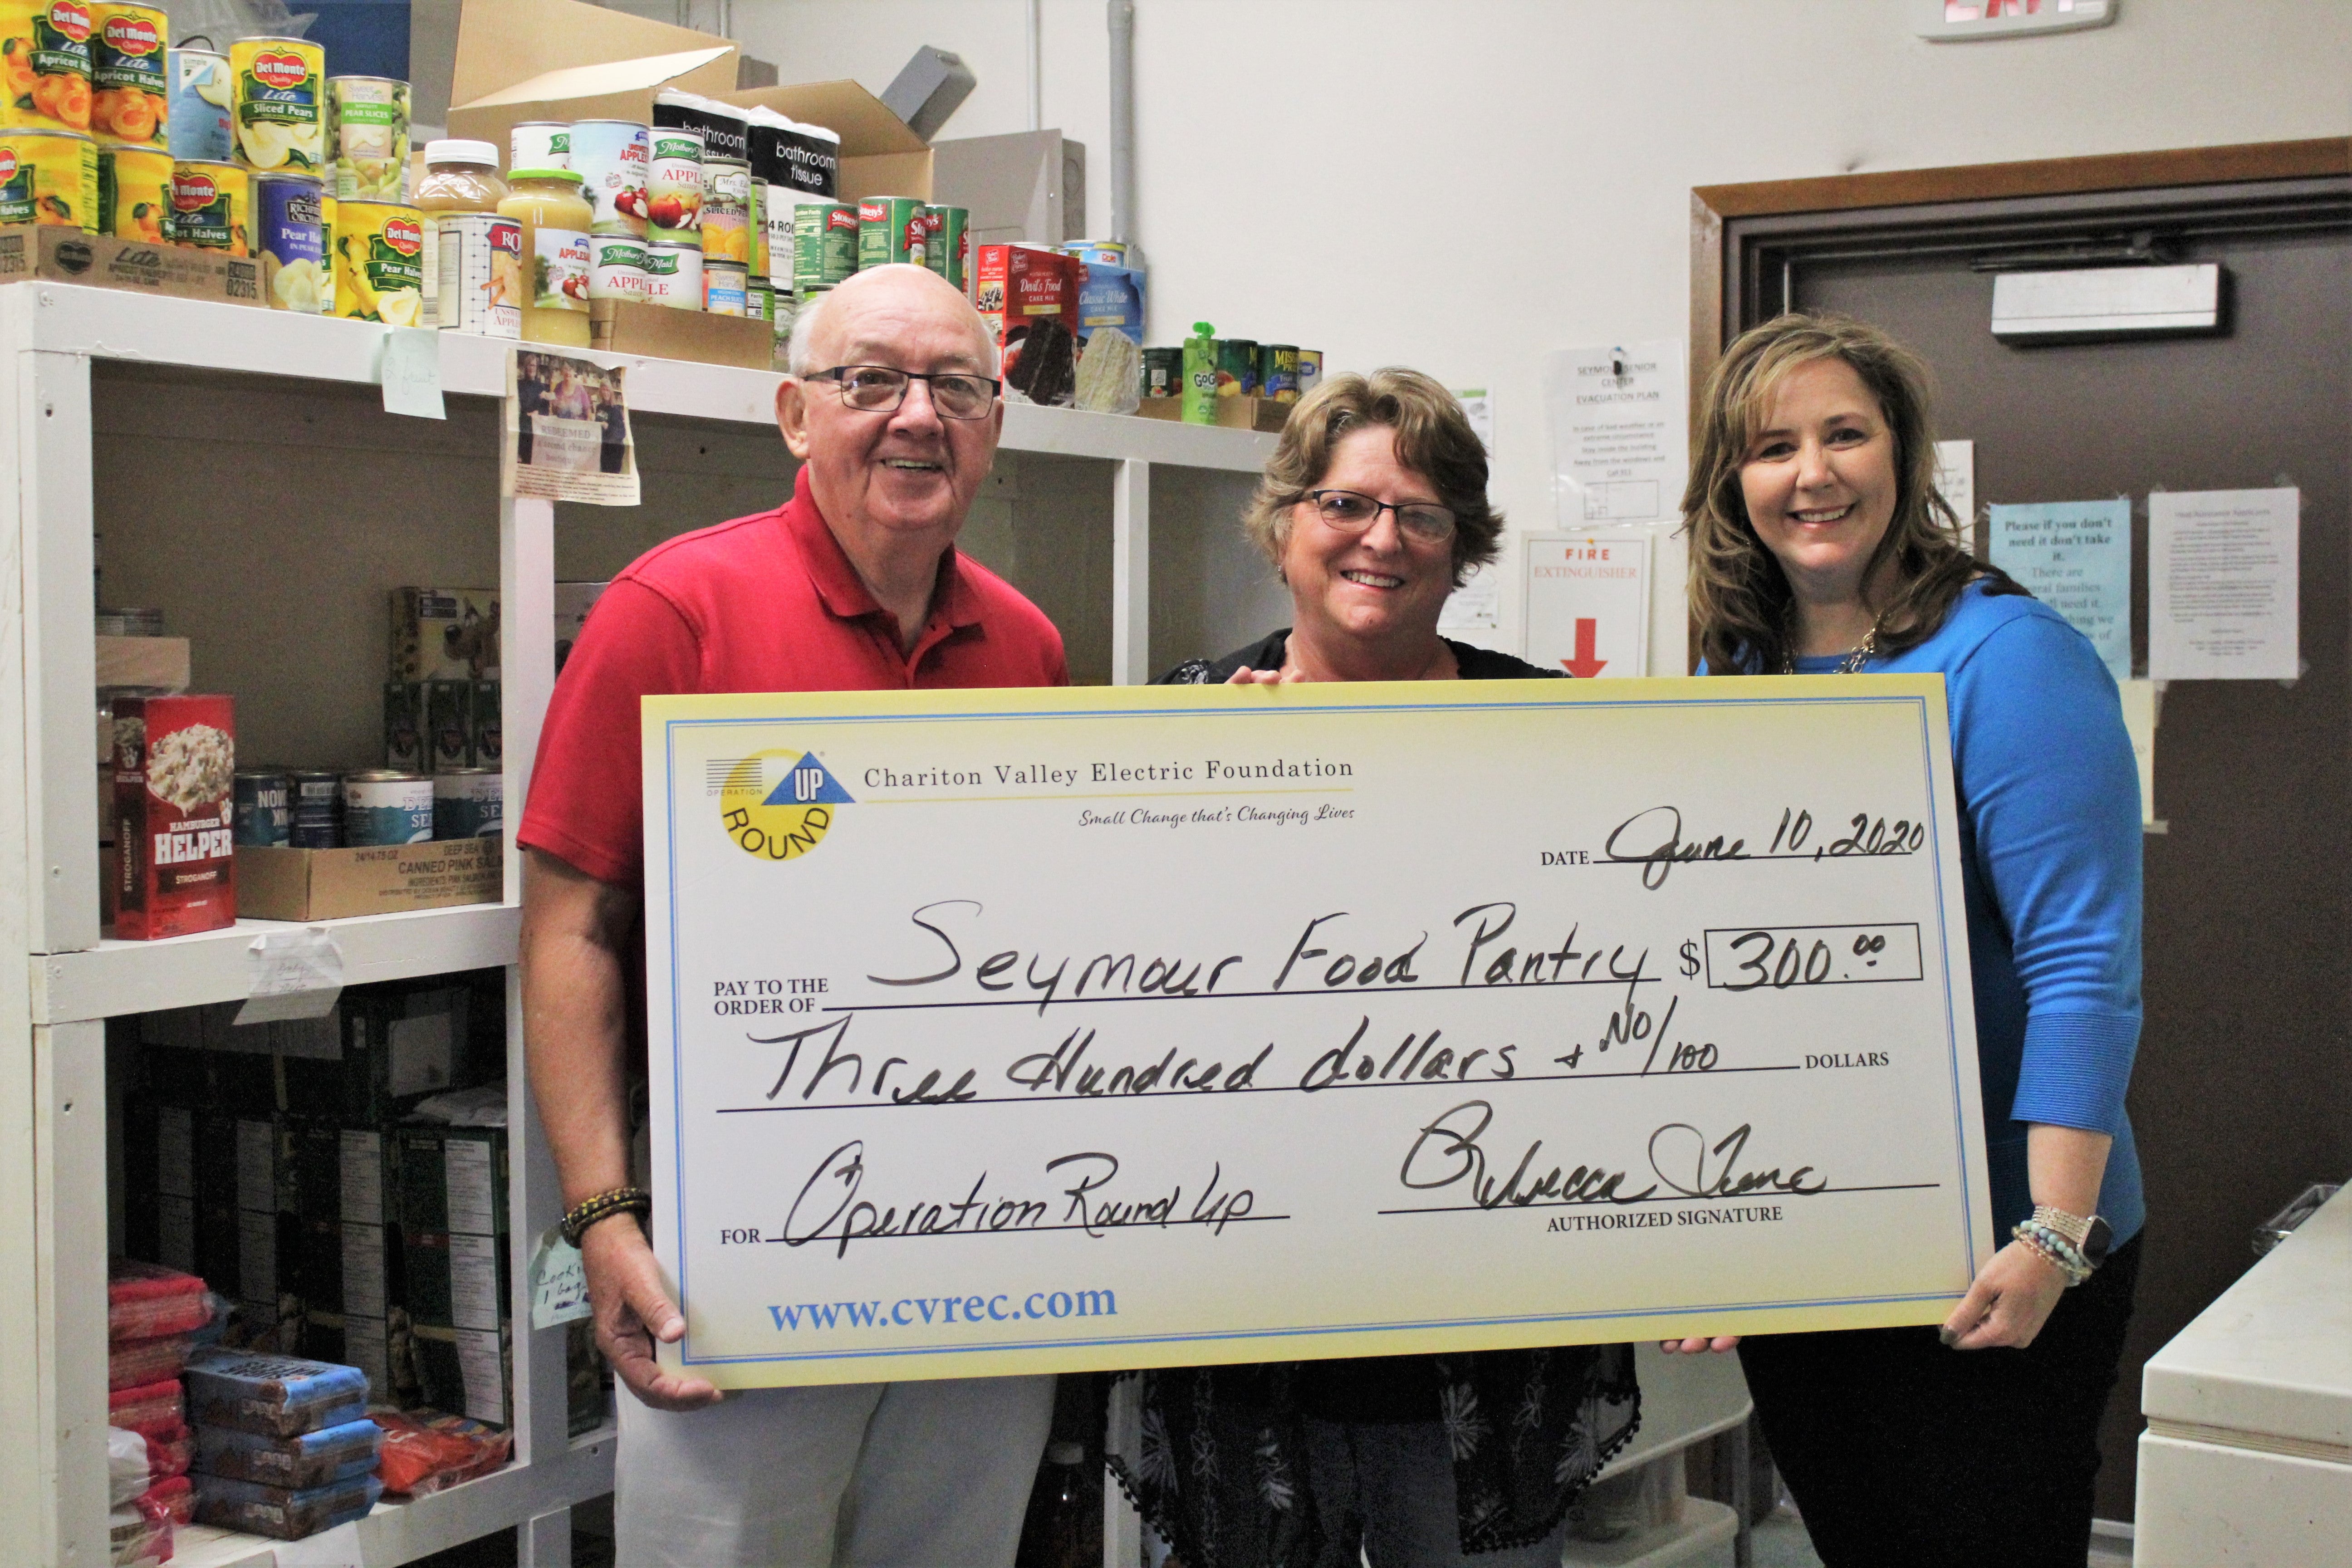 Seymour Food pantry funds awarded